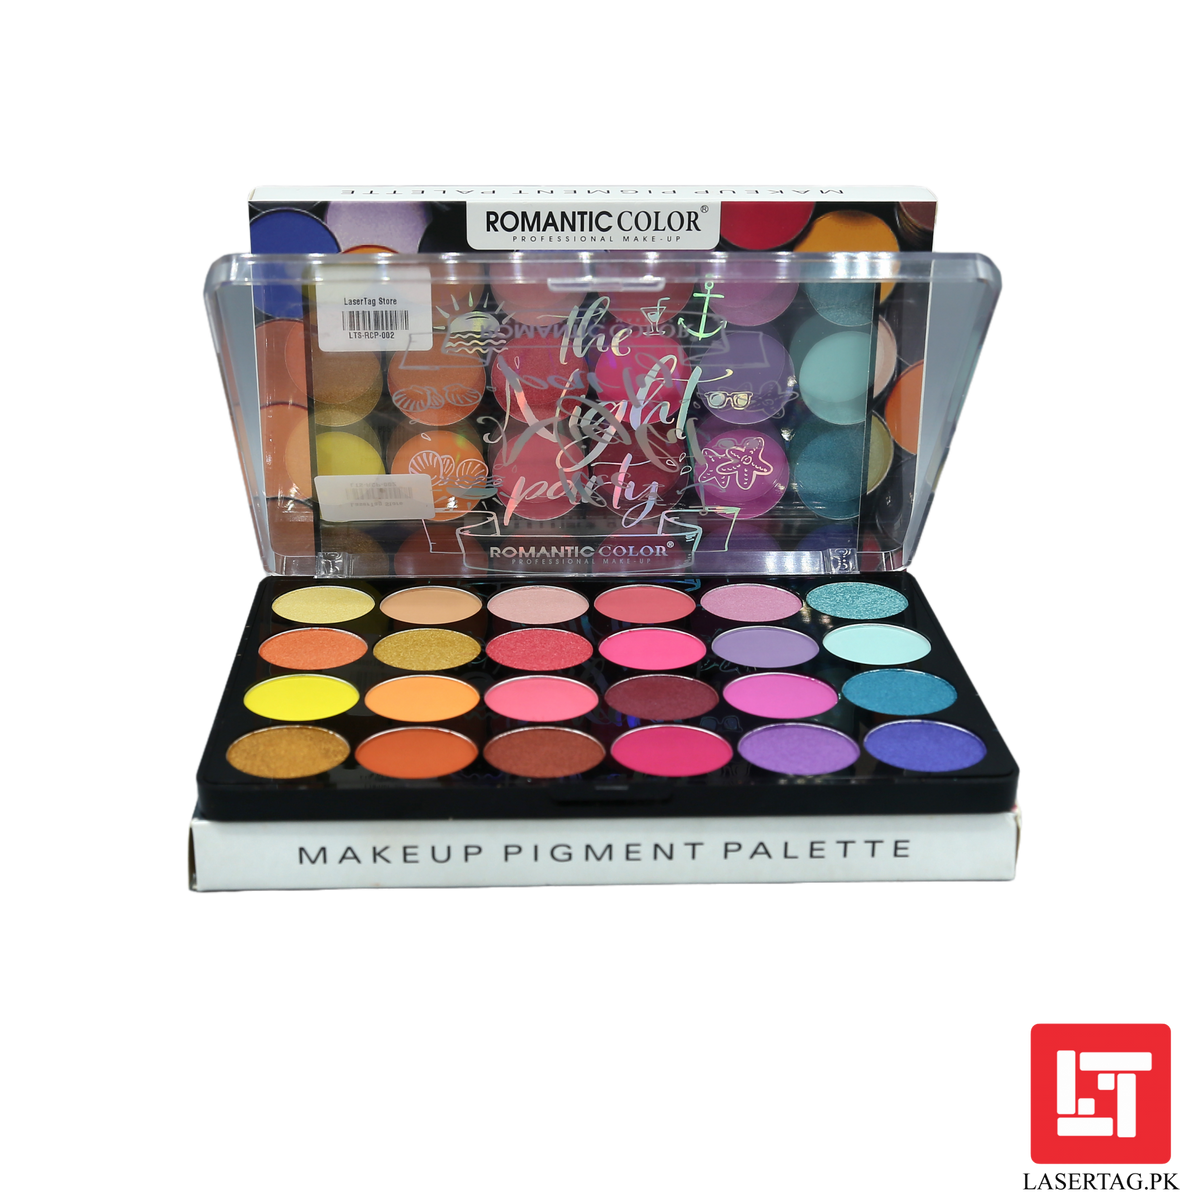 Romantic Color the Night Party Makeup Pigment Palette RC6618 freeshipping - lasertag.pk